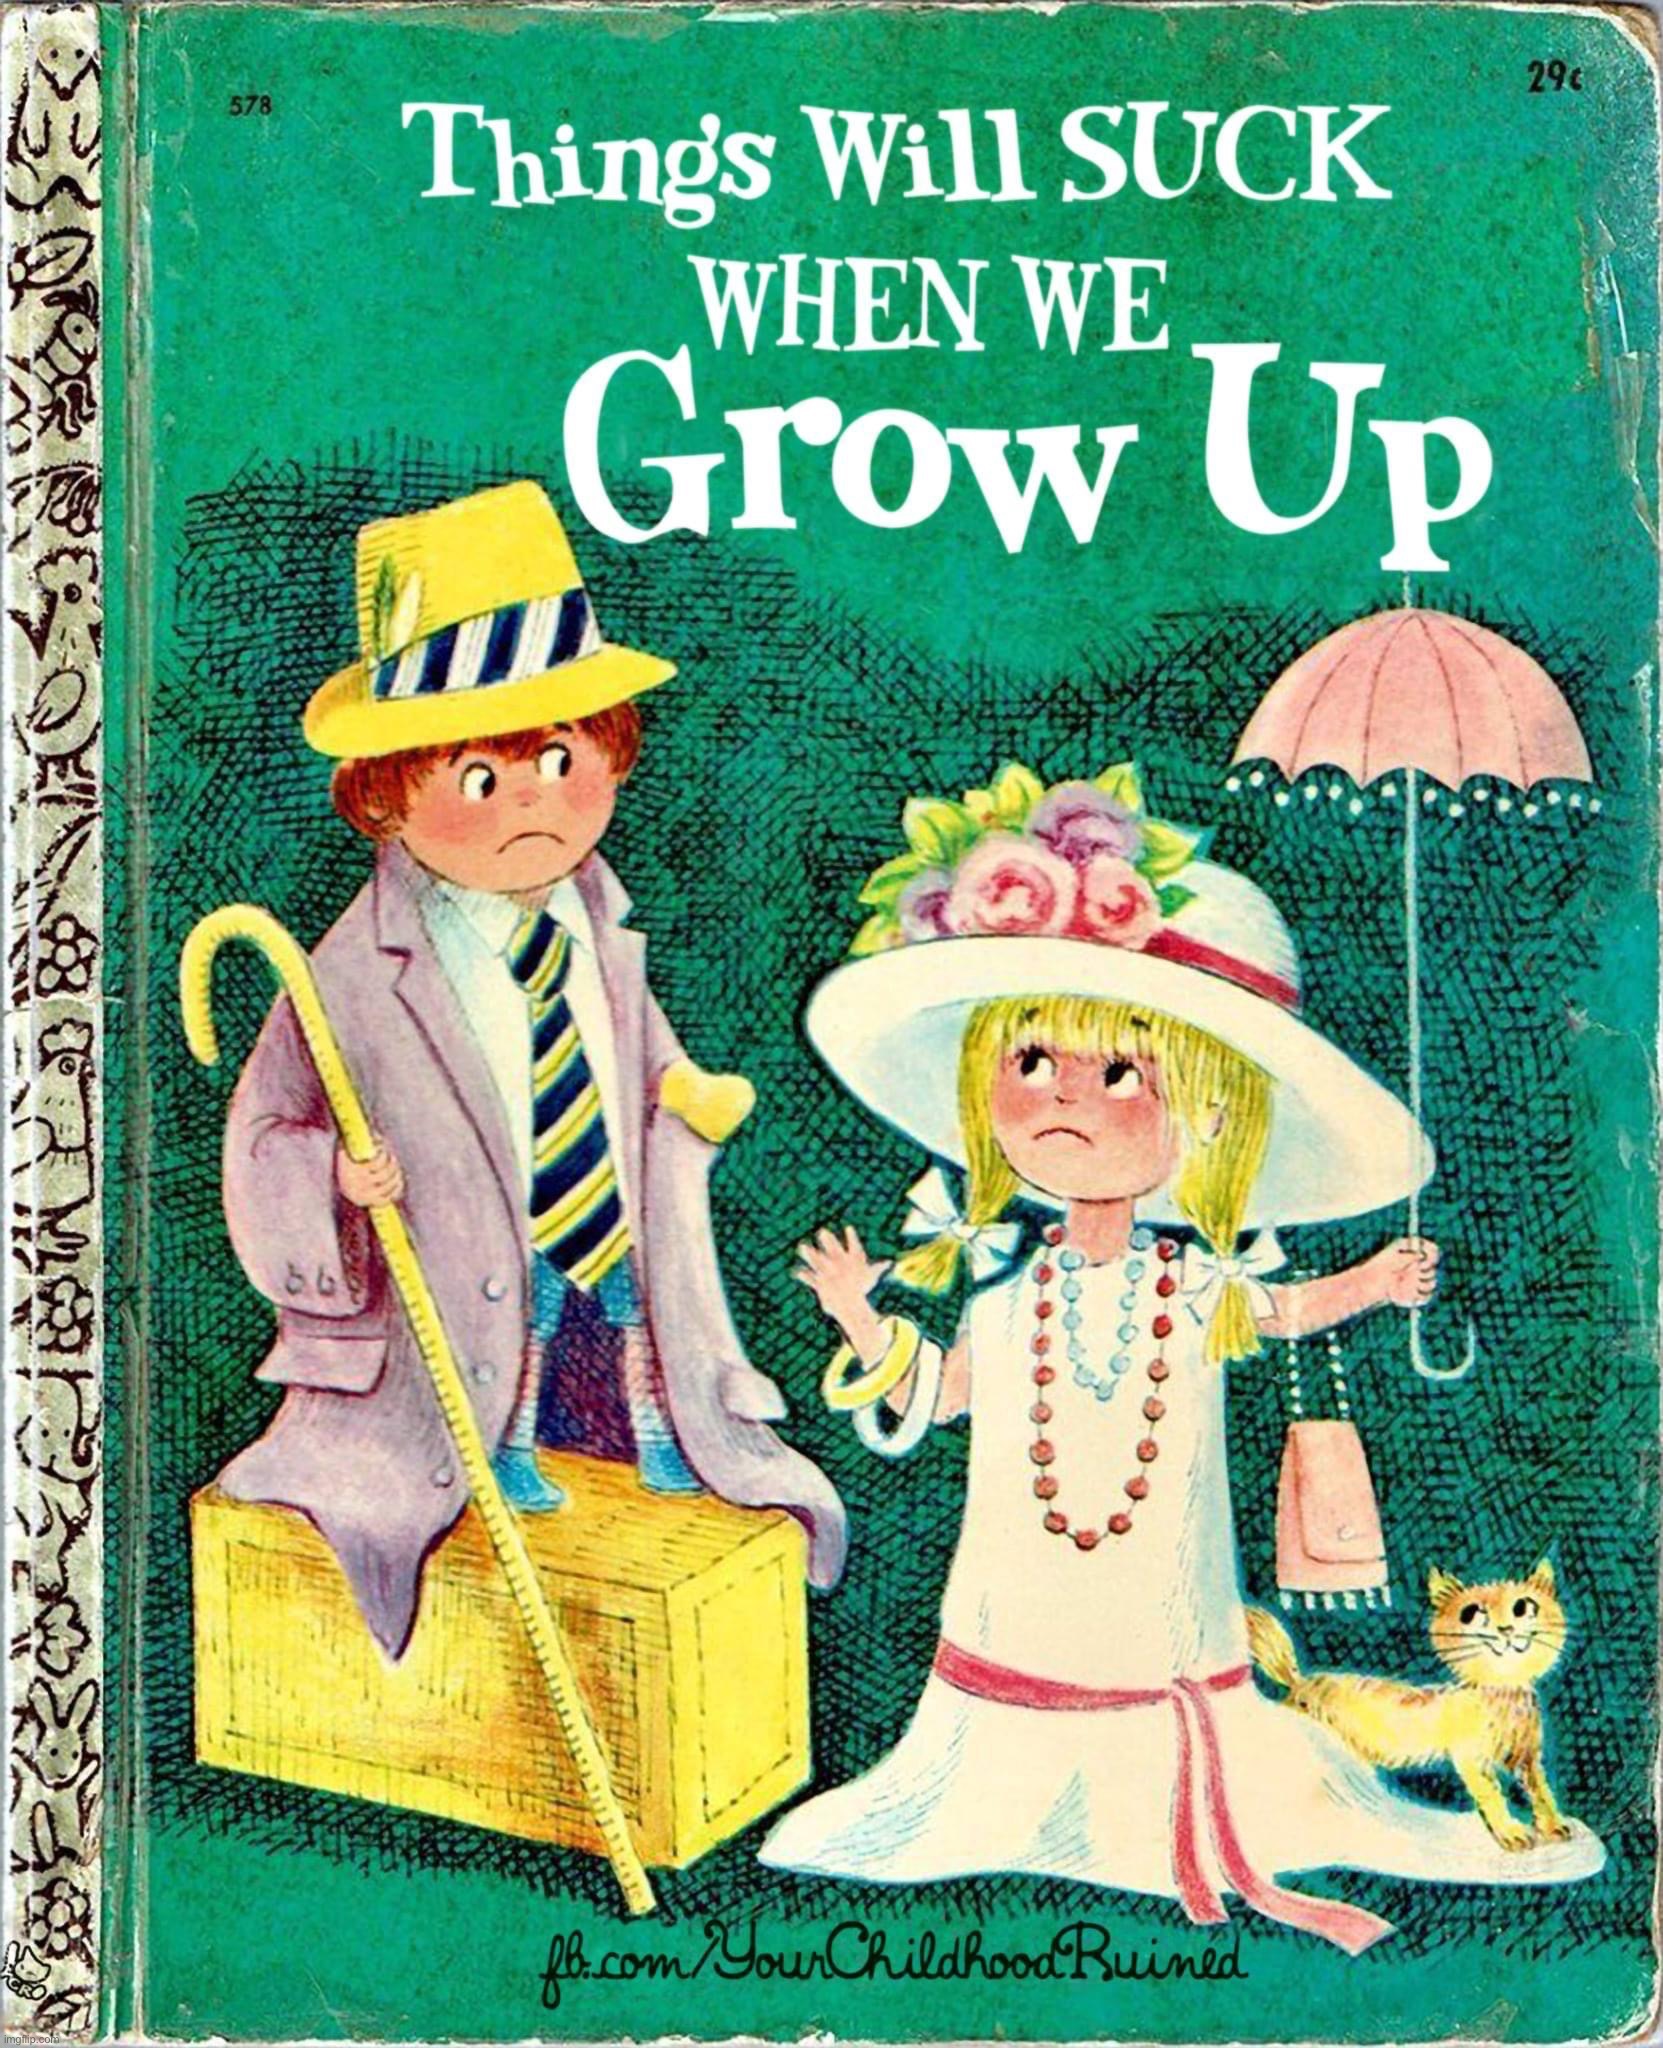 Things will suck when we grow up | image tagged in things will suck when we grow up | made w/ Imgflip meme maker